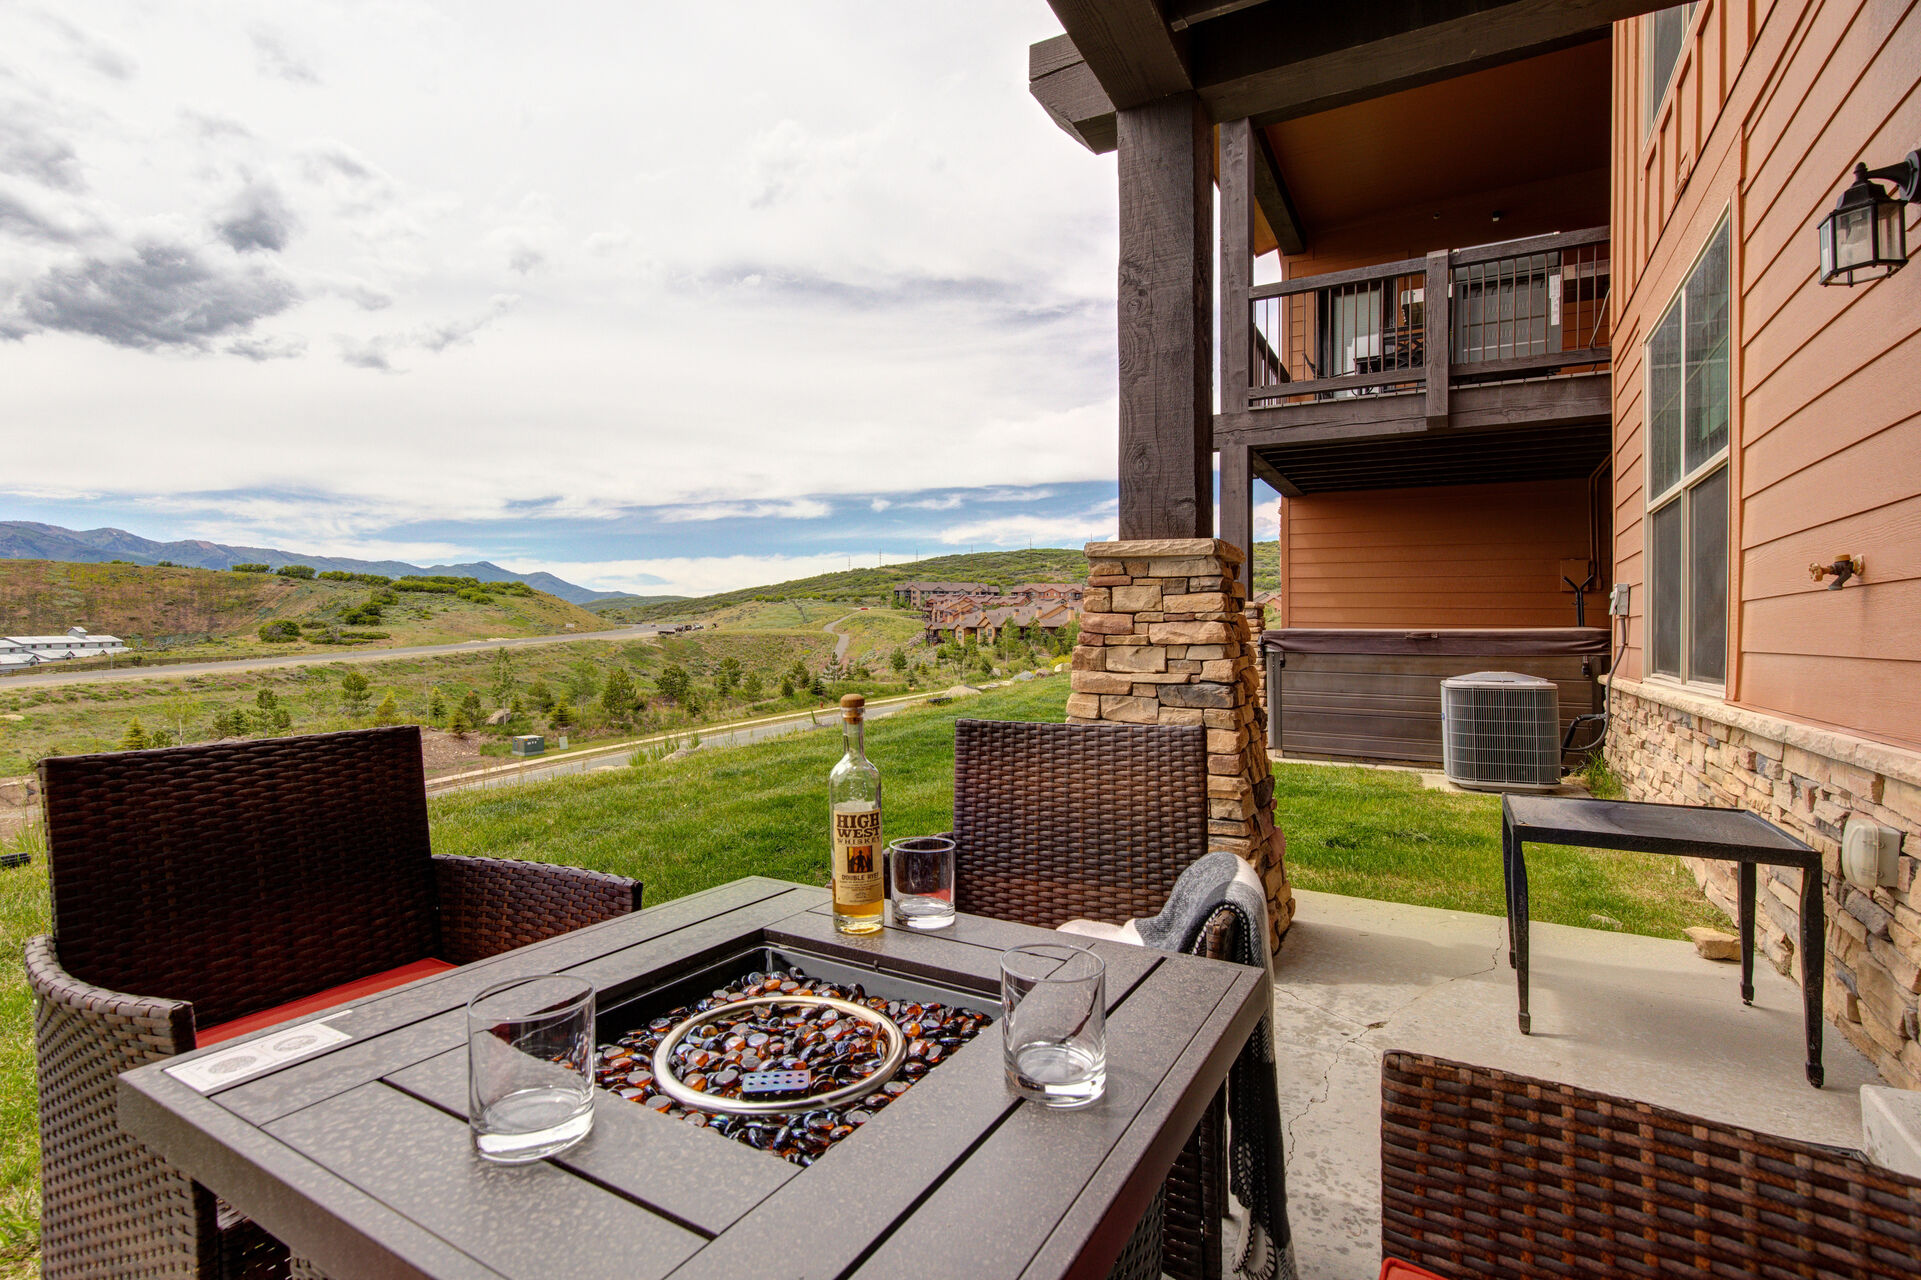 Private Patio with firepit, stunning mountain views, and seating for four